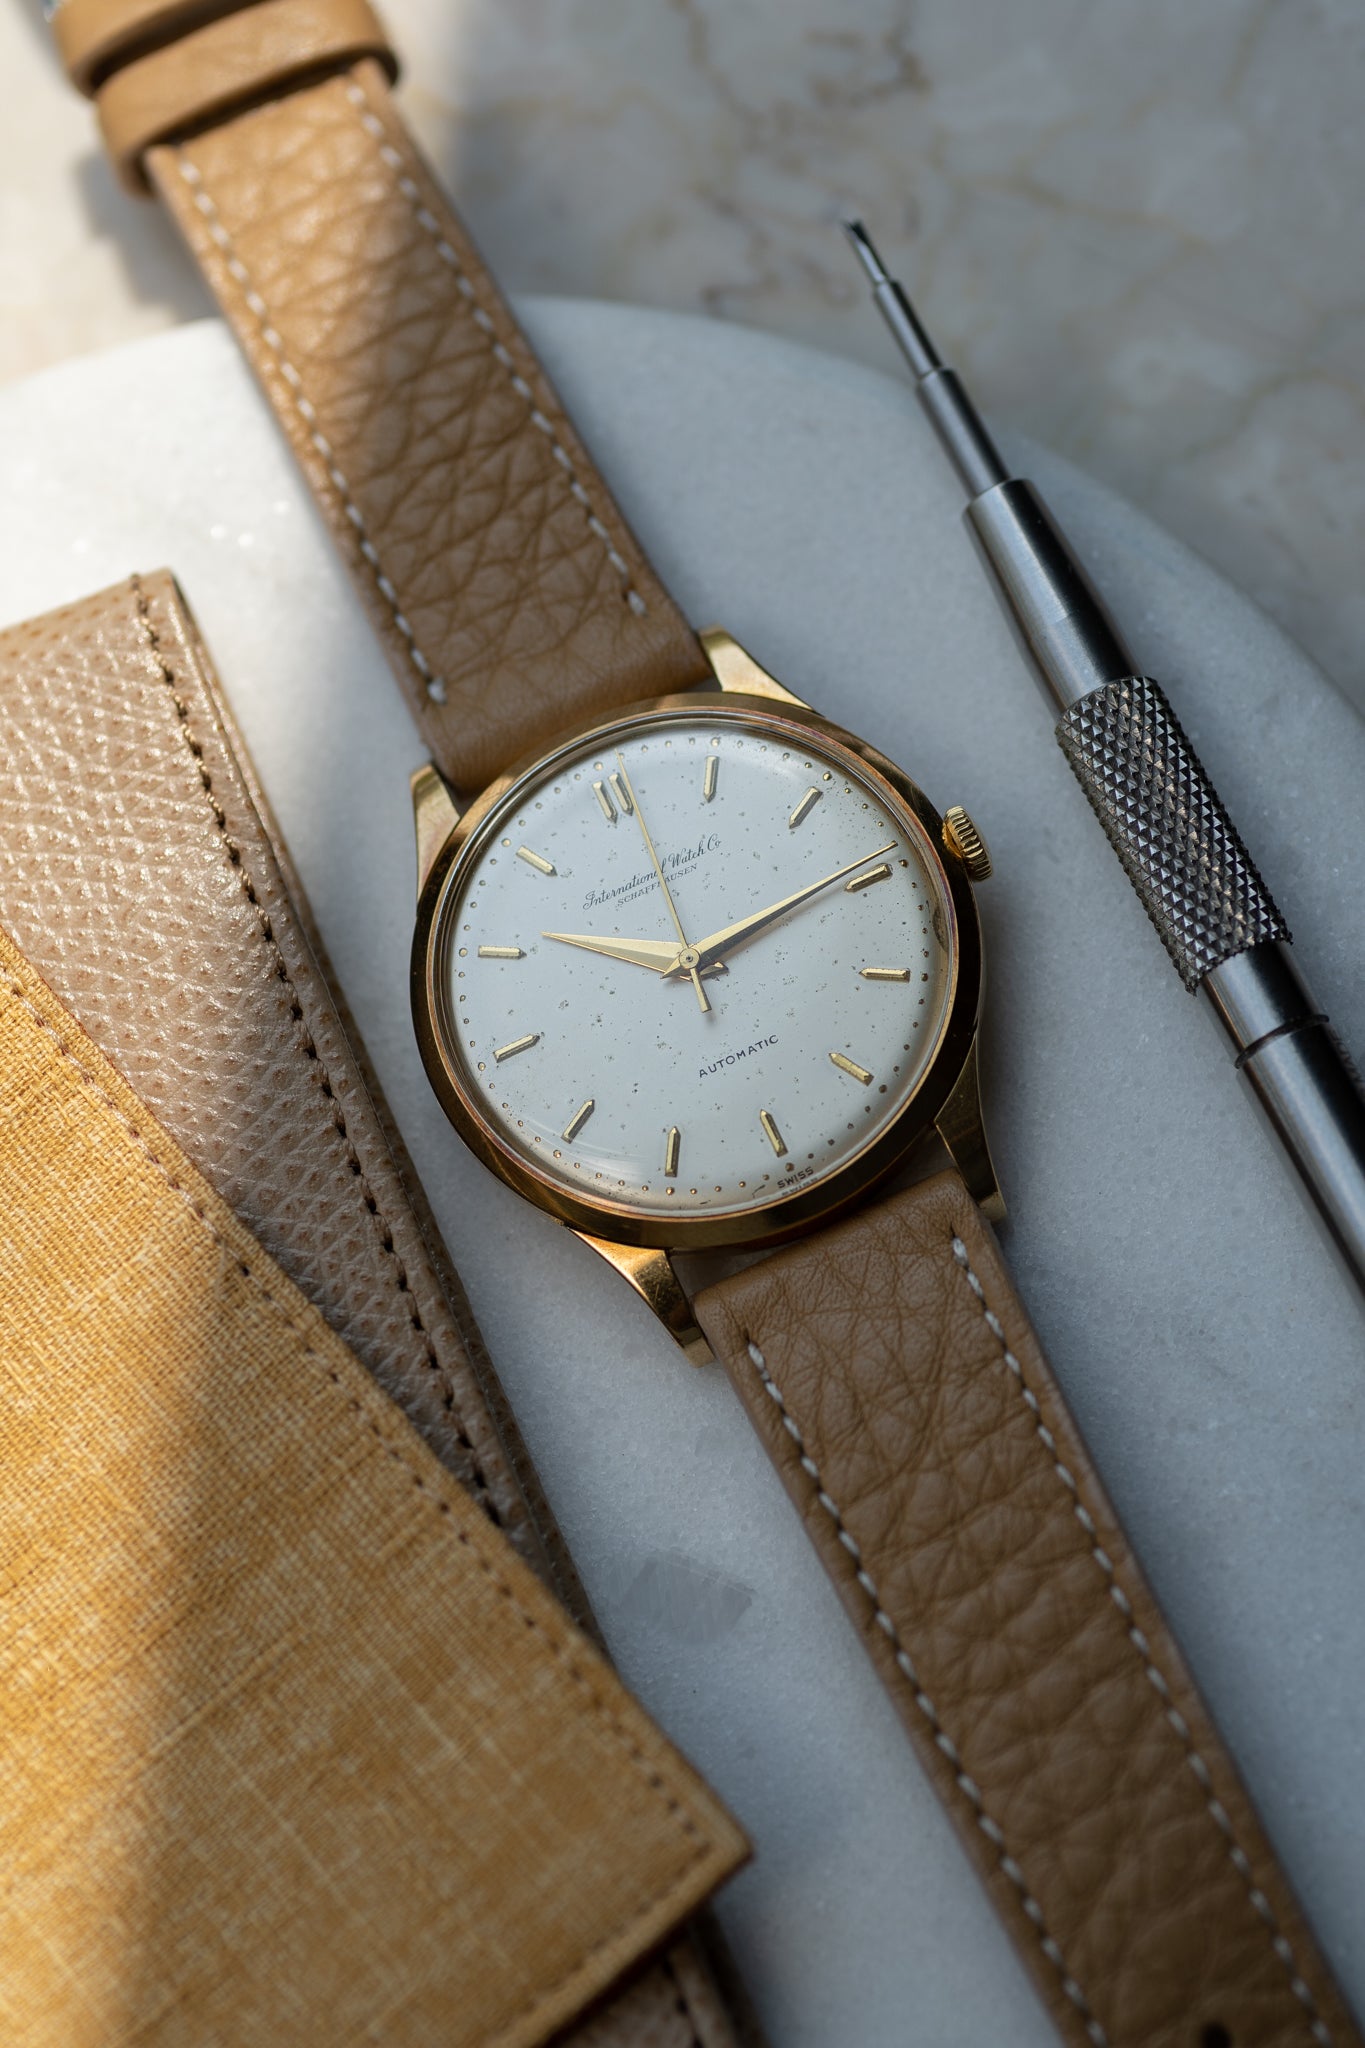 Introducing The Serica 4512 California TXD With Enamel Dial - Worn & Wound